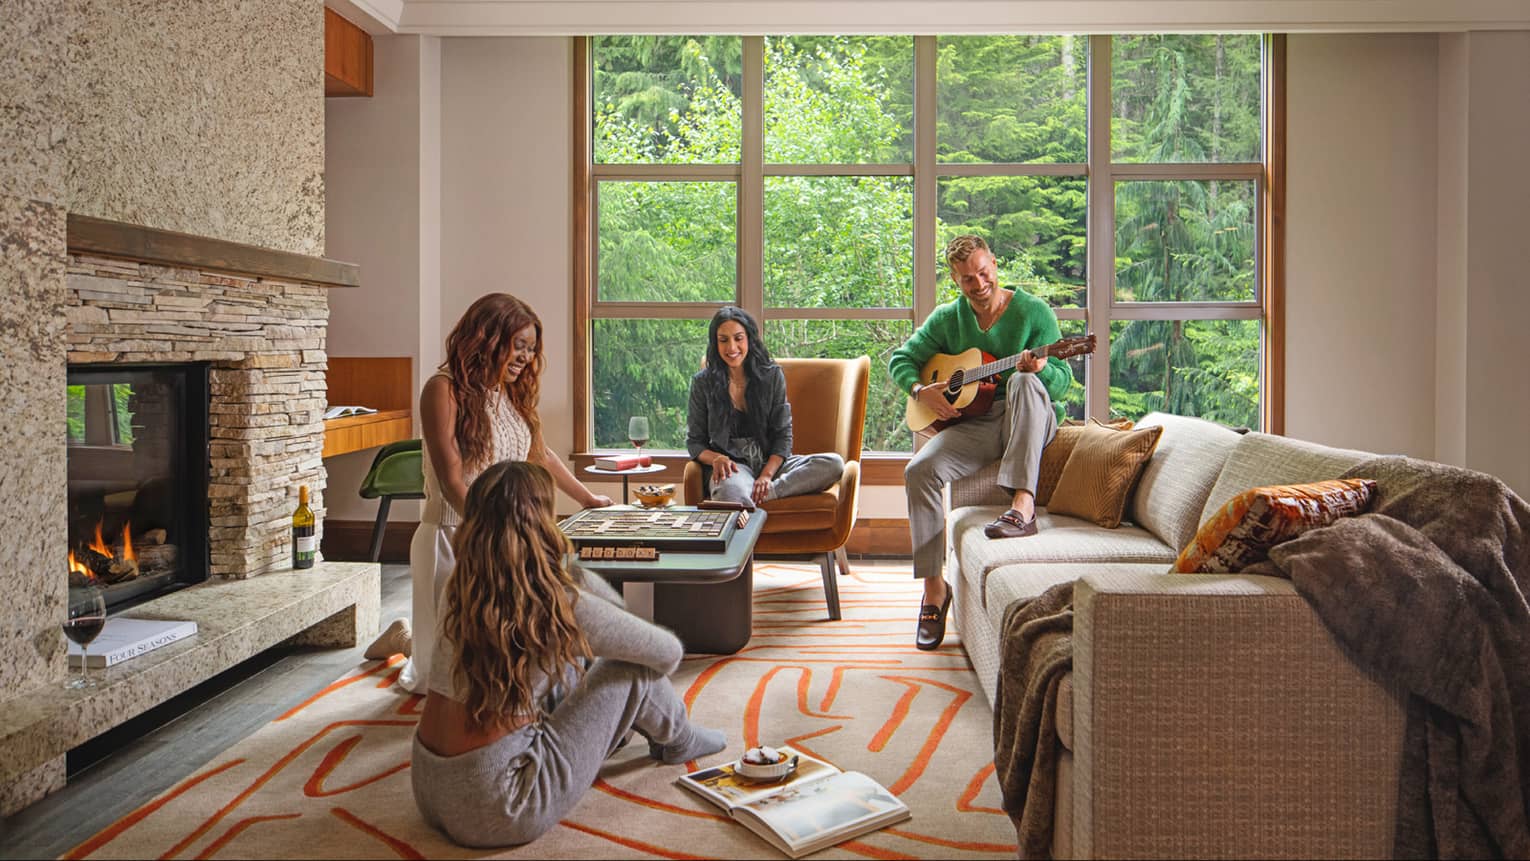 Cozy gathering in a luxury vacation rental living area at Four Seasons Whistler. Four people enjoy leisure time together; one man plays guitar while seated on a chair, and three women engage in conversation and board games. The room is warmly decorated with a stone fireplace, large windows showcasing a forest view, a plush sofa, and vibrant geometric-patterned rugs.